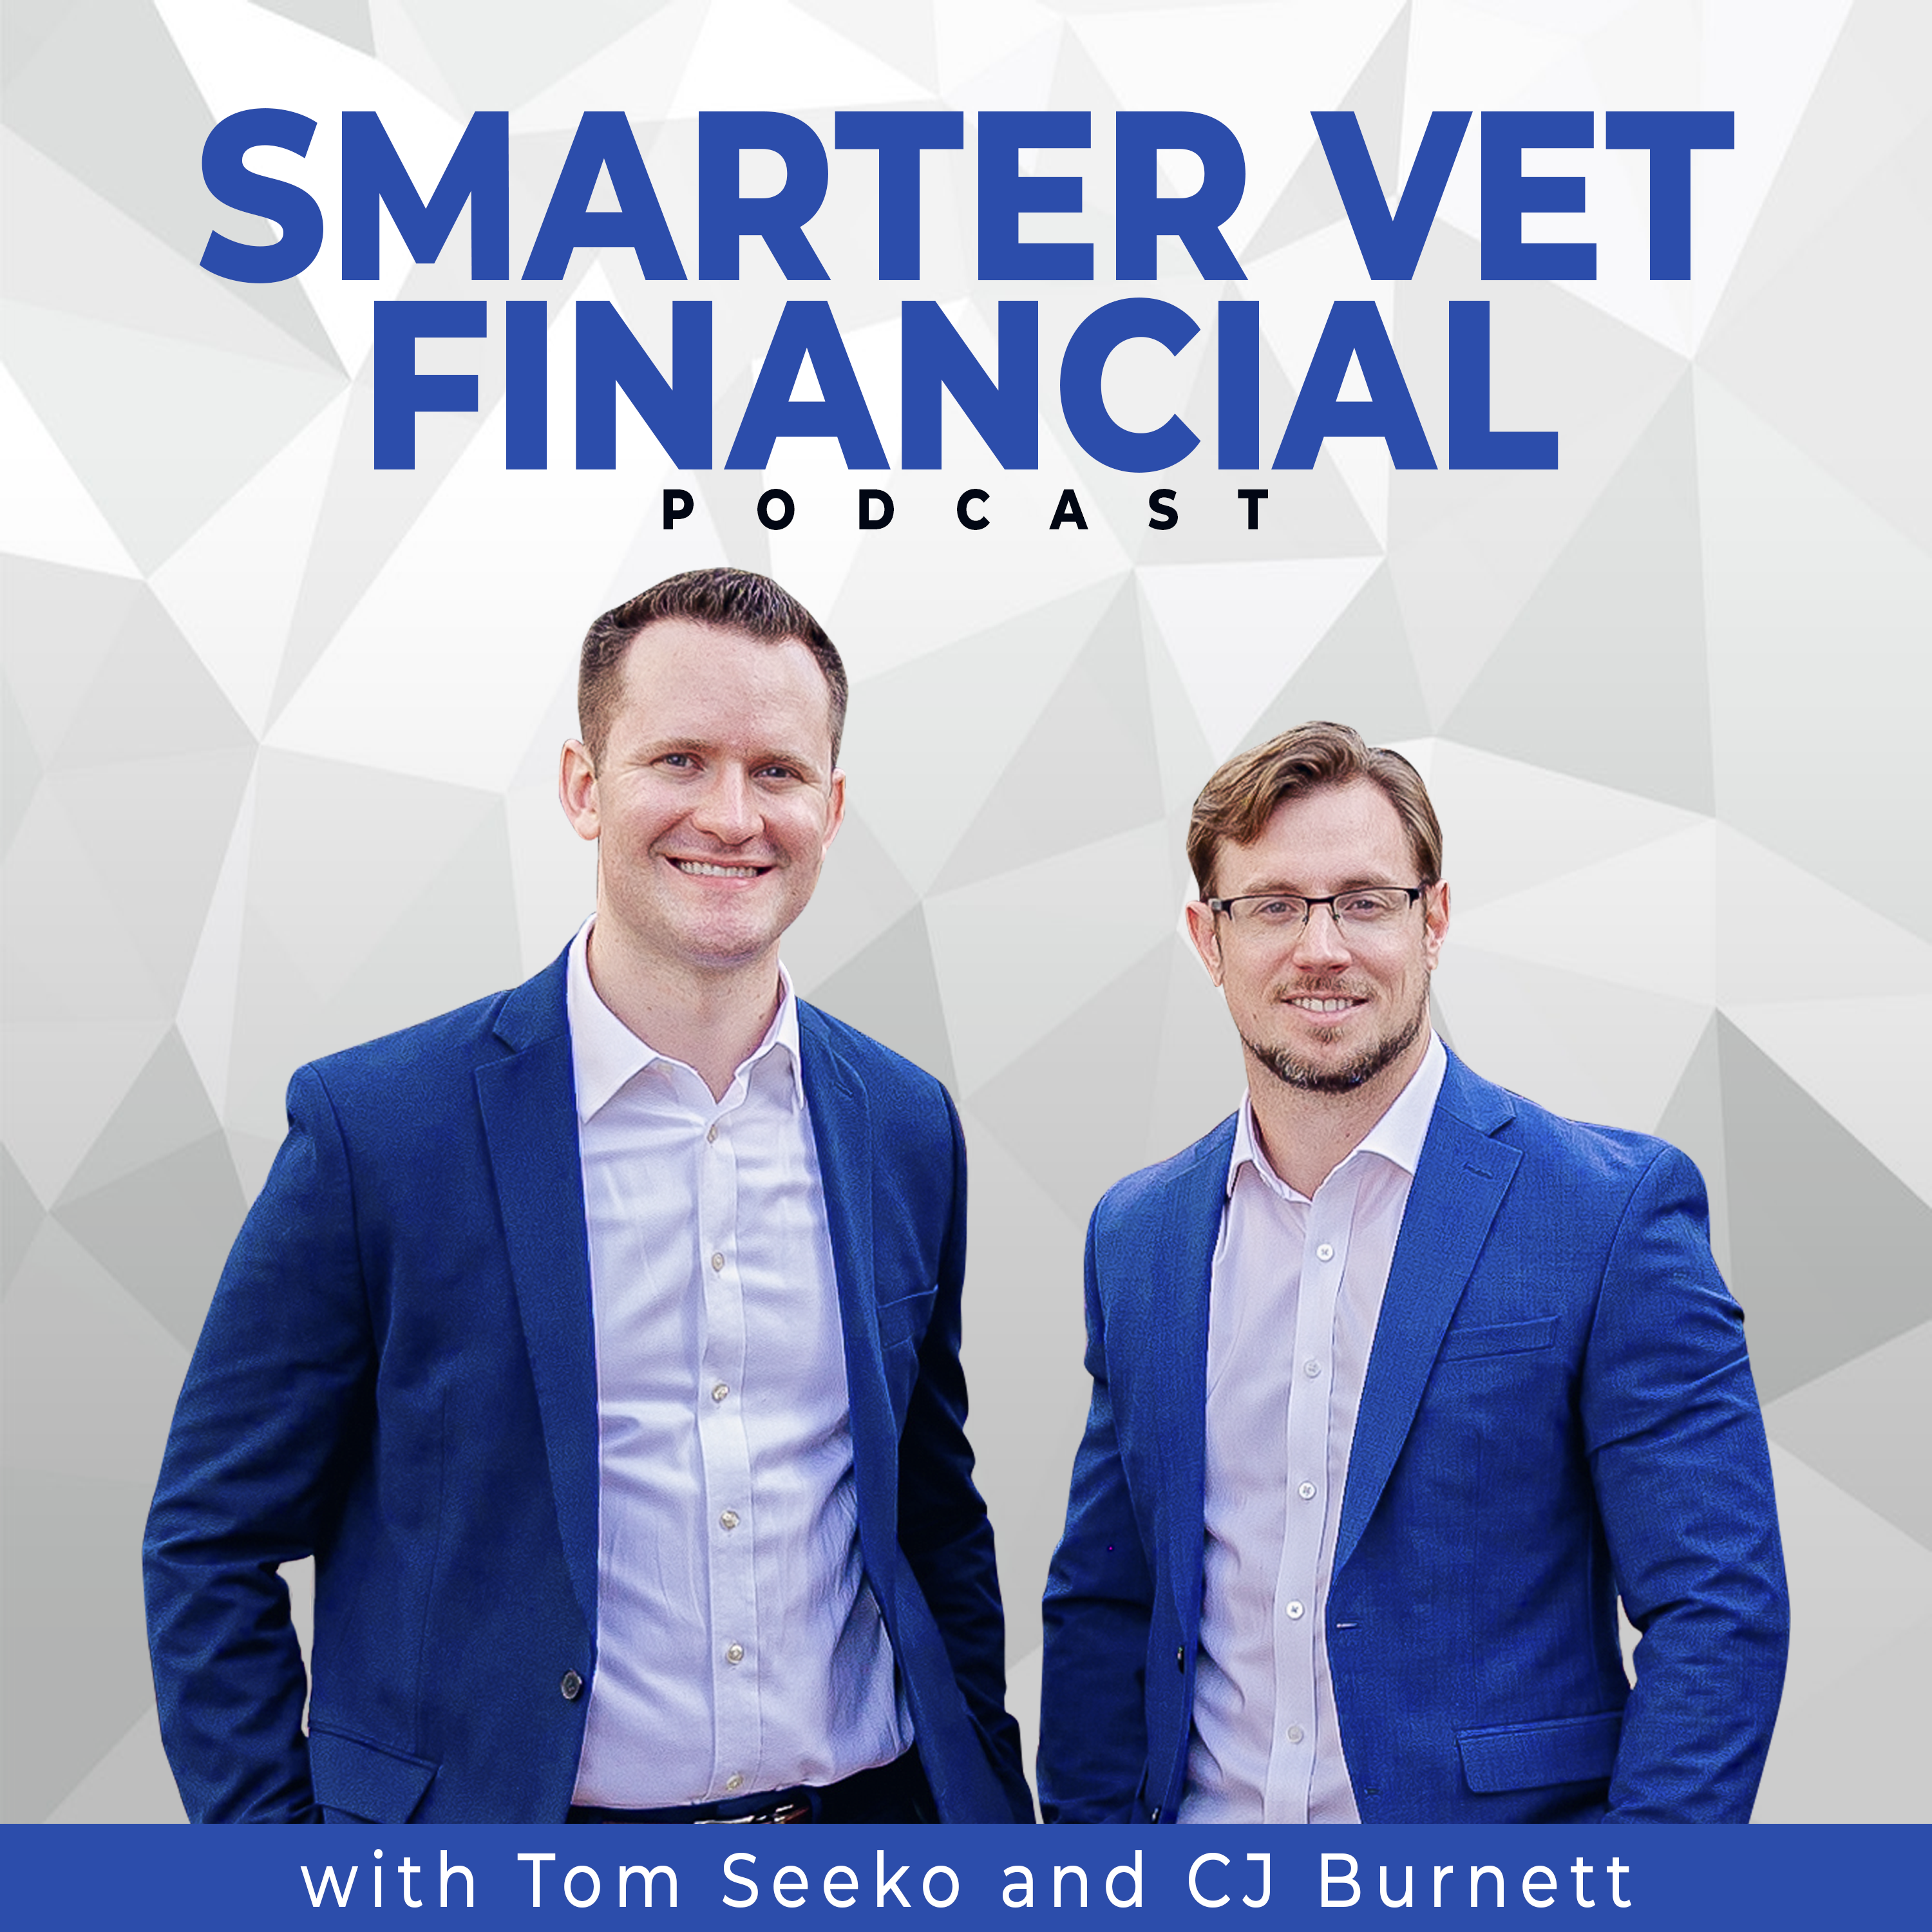 Click to check out the Smarter Vet Financial Podcast on Apple Podcasts.